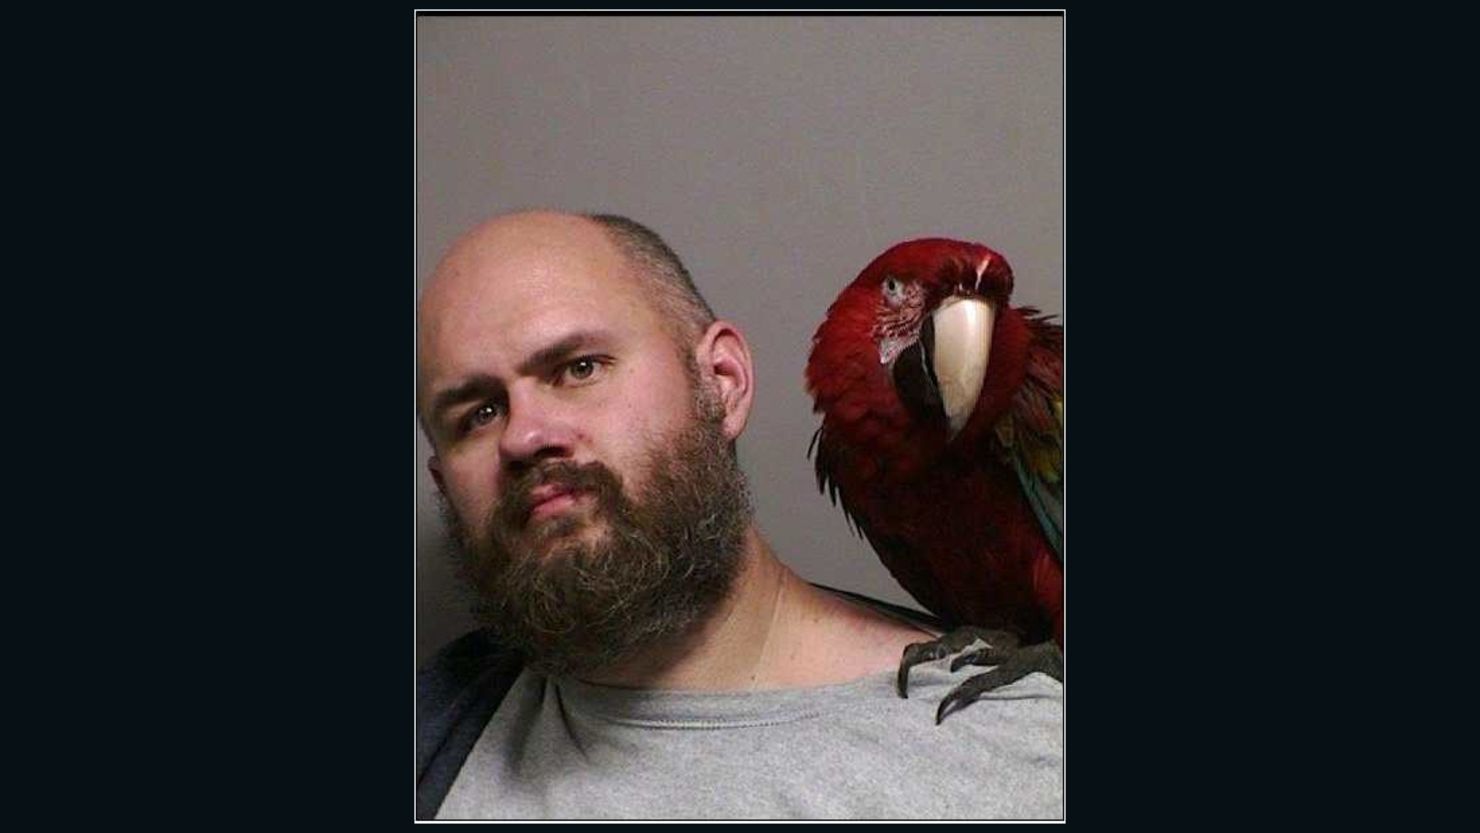 Craig Buckner appeared in court with his companion parrot, "Bird."